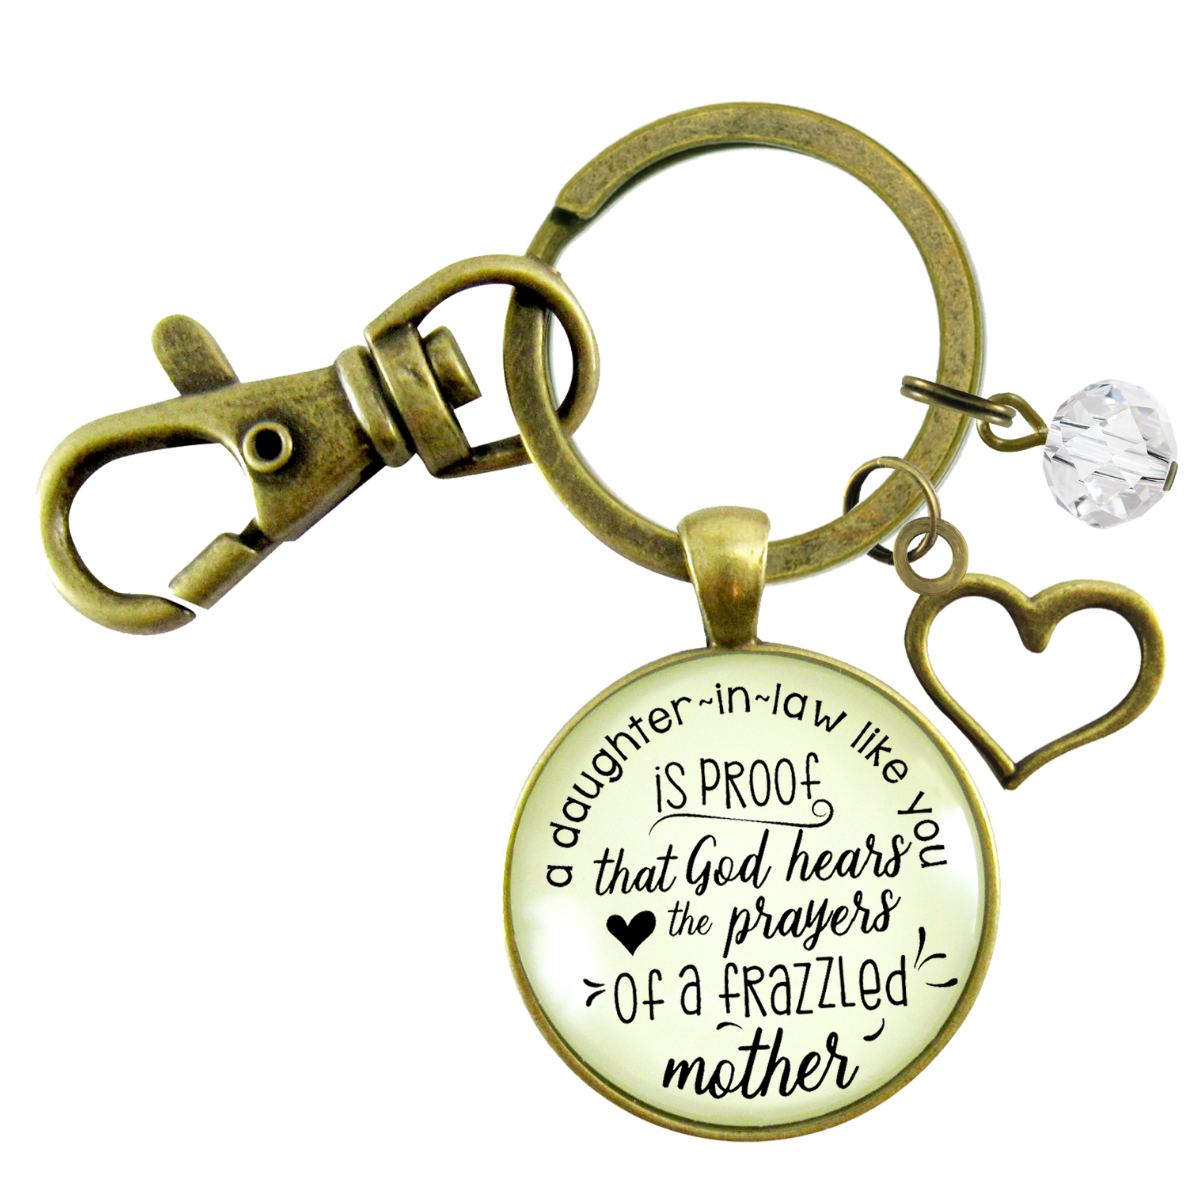 Daughter In Law Gift Keychain Proof God Hears Mother's Prayers Fun Gift Jewelry Heart Charm - Gutsy Goodness Handmade Jewelry;Daughter In Law Gift Keychain Proof God Hears Mother's Prayers Fun Gift Jewelry Heart Charm - Gutsy Goodness Handmade Jewelry Gifts